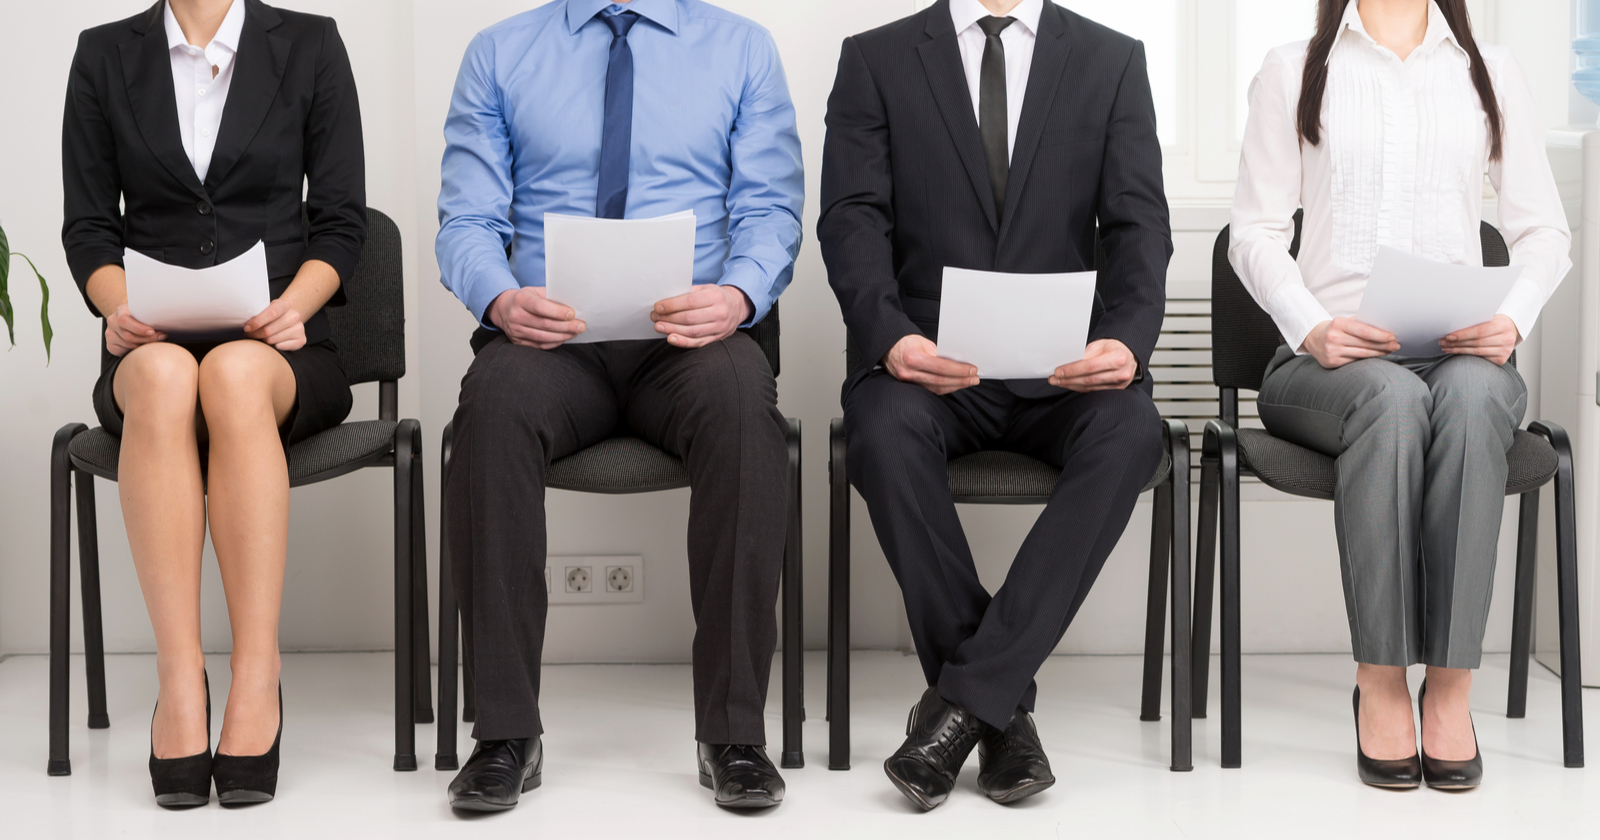 46 SEO Job Interview Questions to Assess a Candidate's Knowledge